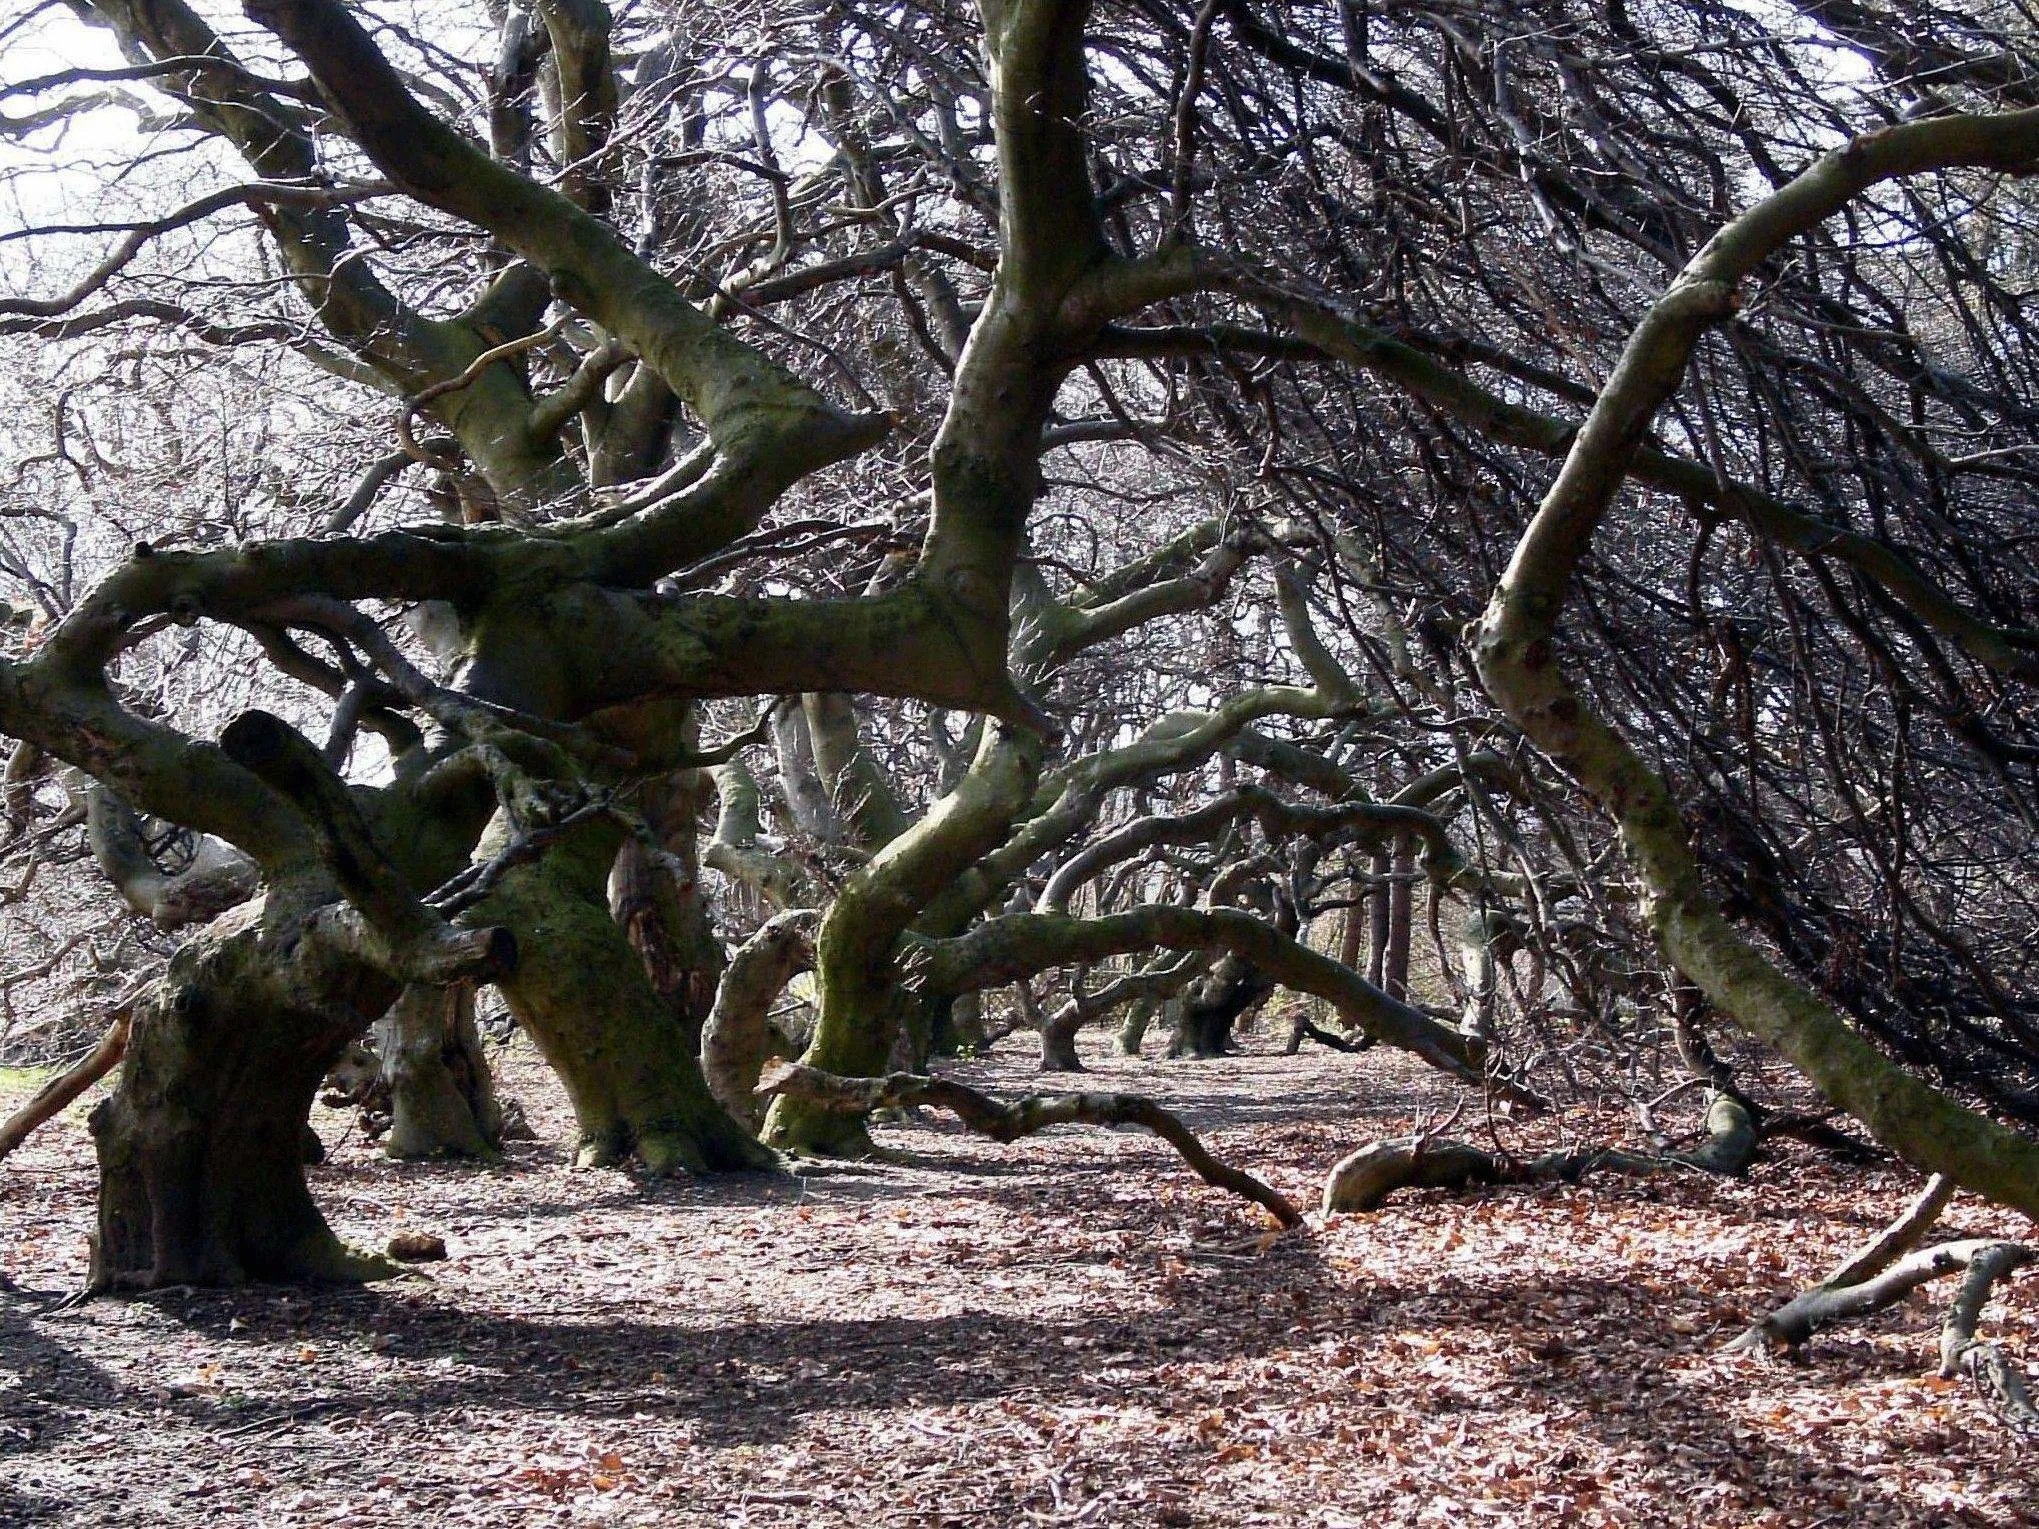 Photo showing: Round about 100 Dwarf Beeches in the Kurpark (spa gardens) of Bad Nenndorf in Lower Saxony (Germany), up to 100 years old. In 1930 approximately 20-30 Dwarf Beeches (10-20 years old and all of them seedlings of a very famous Dwarf Beech named Tilly-Buche) were plant in the park, the rest of the trees  came up from the resurfaced roots (not from seeds/beechnuts) in the following decades.